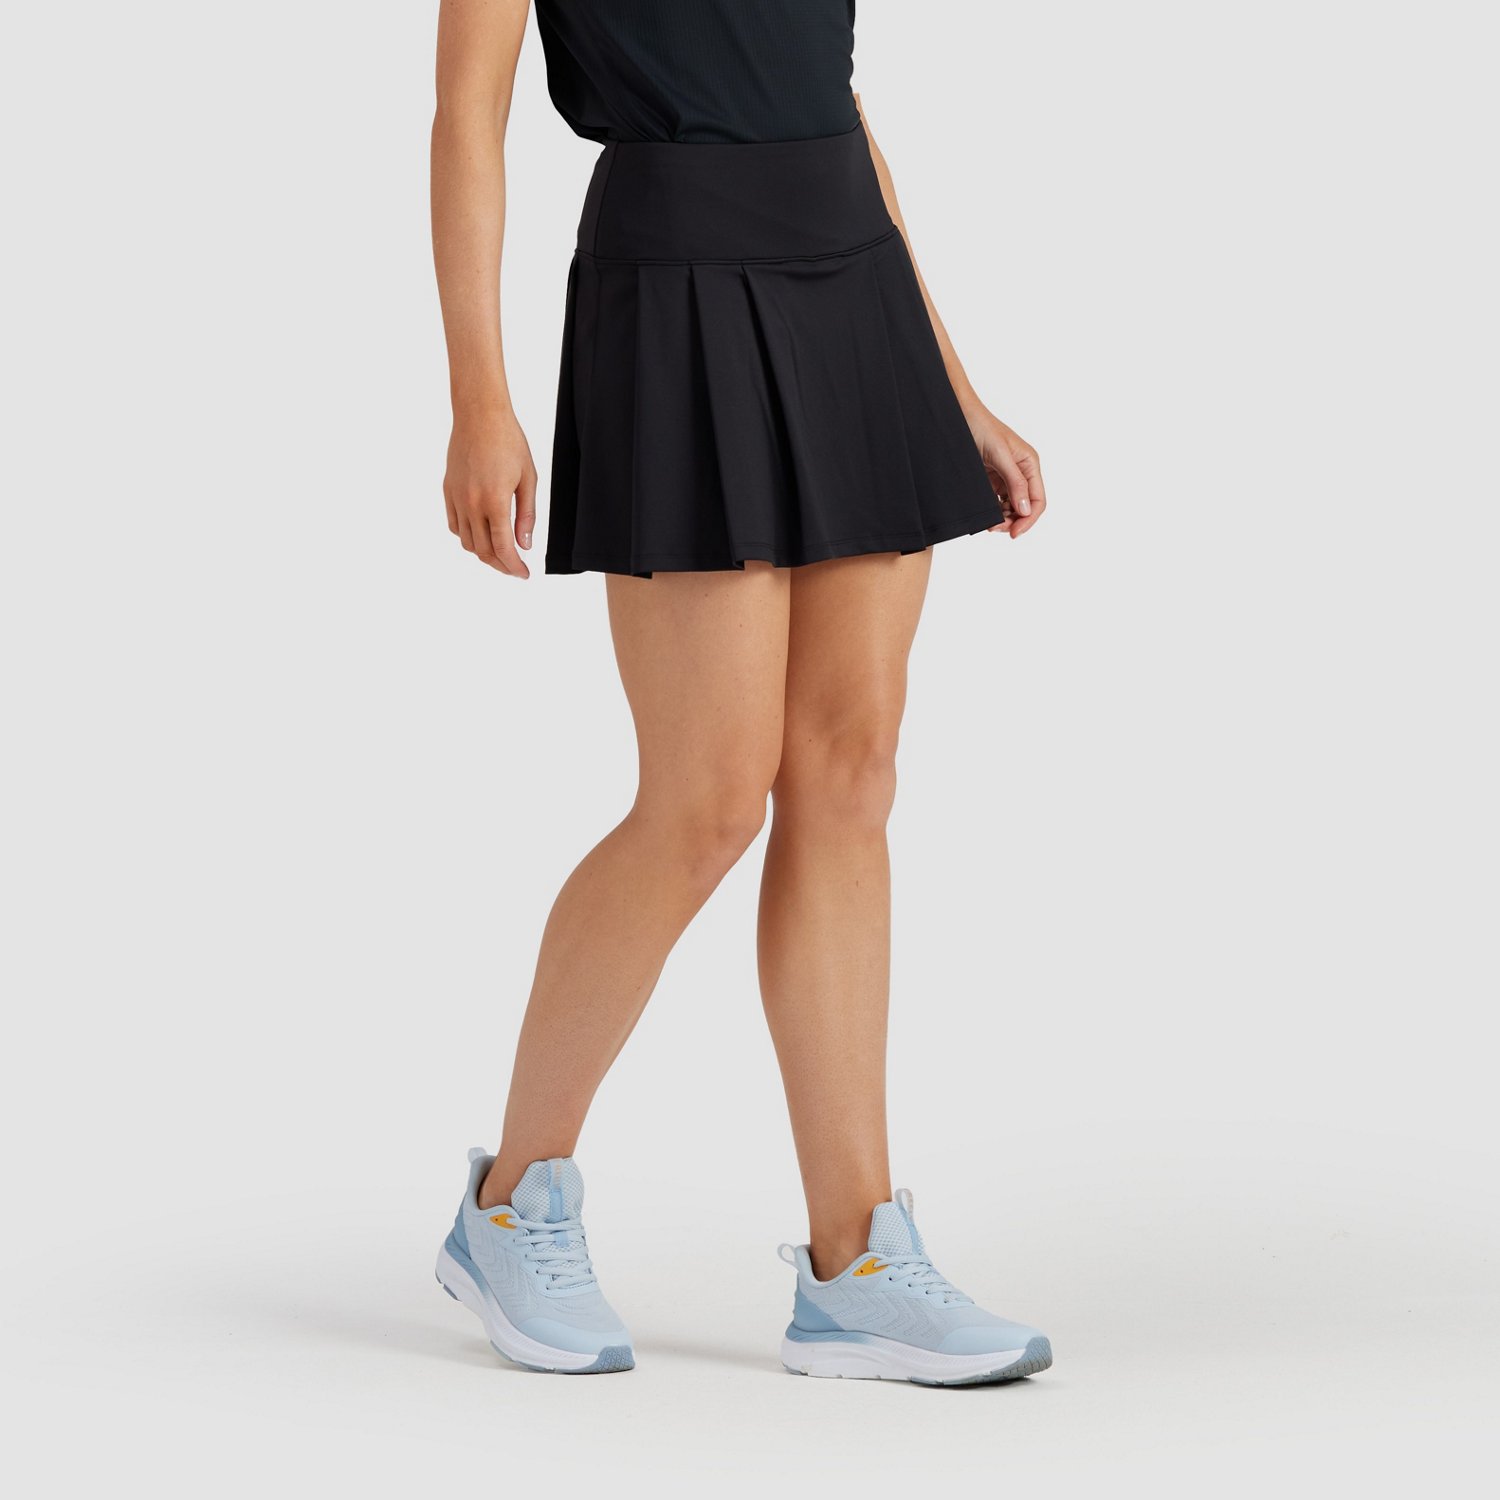 FREELY Women's Clothing & Activewear